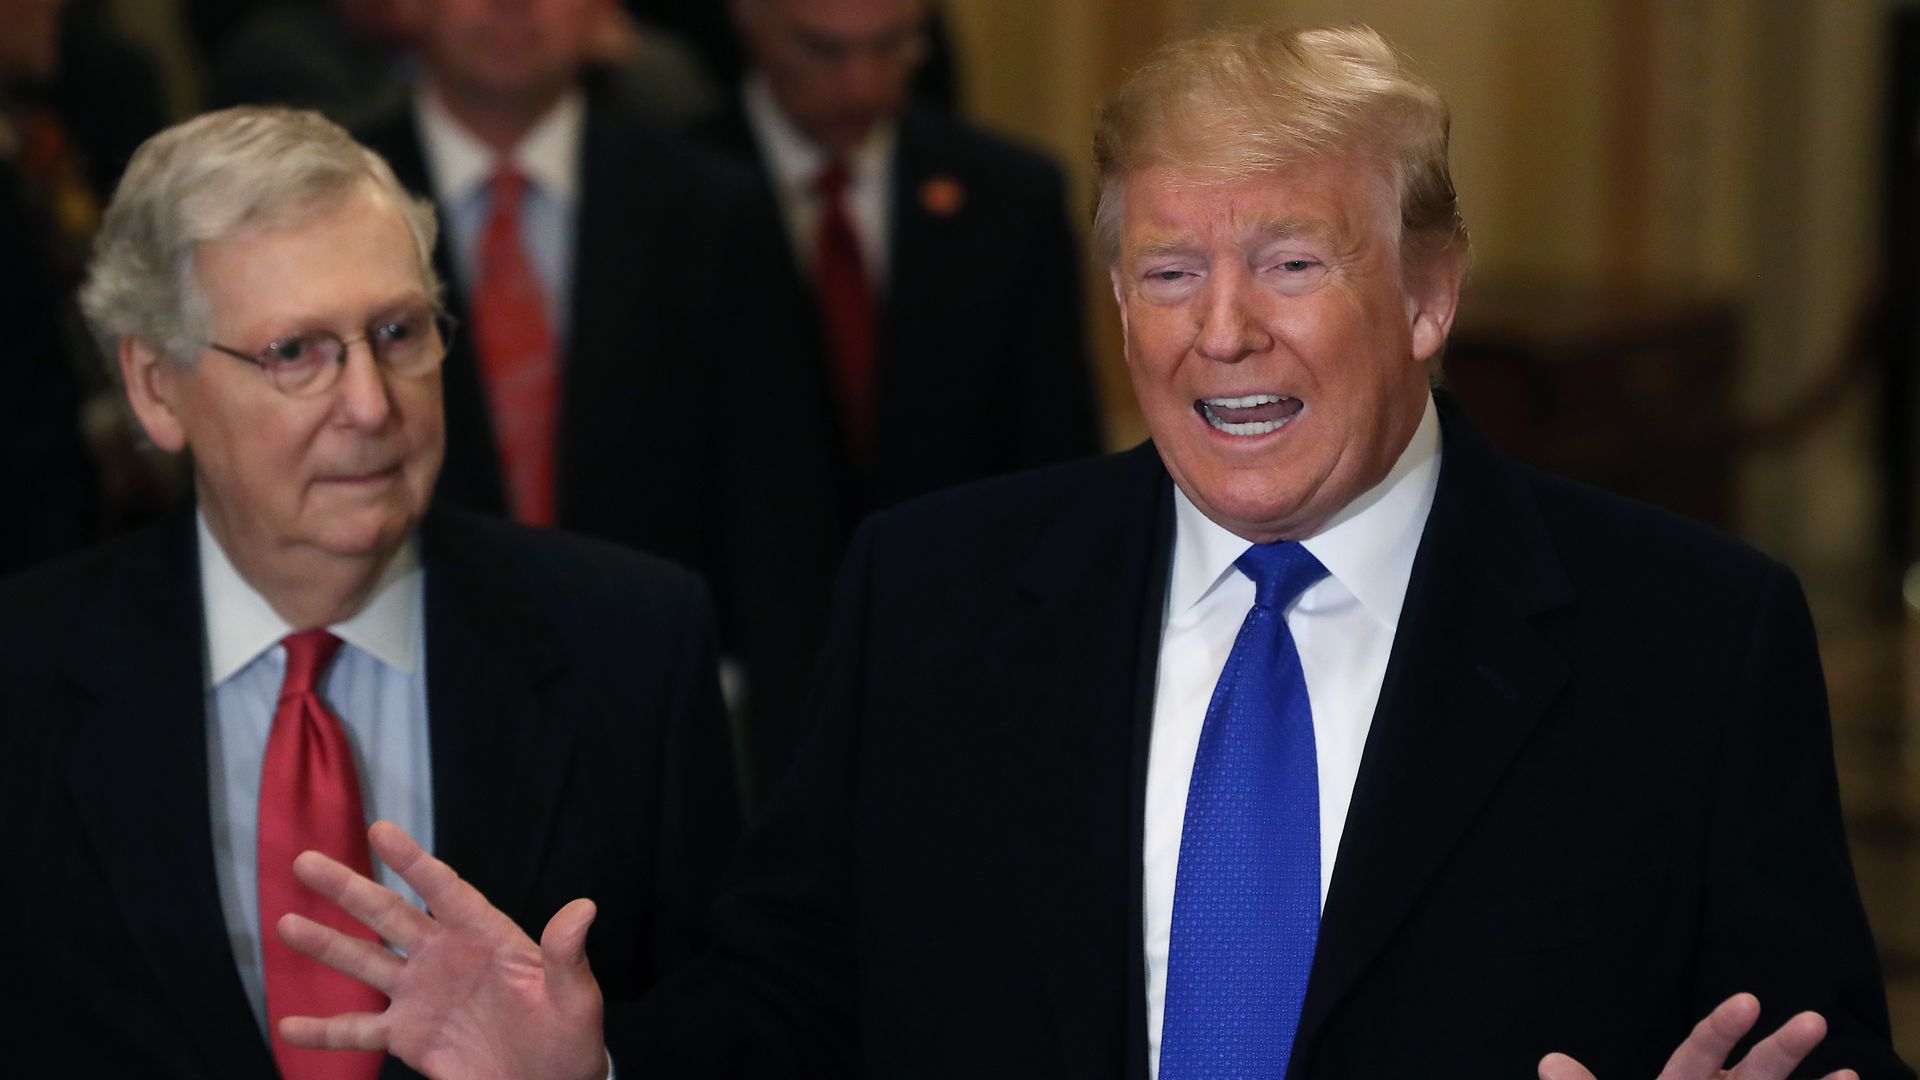 In this image, Mitch McConnell stands next to President Trump, who is talking with both hands splayed out in front of him.